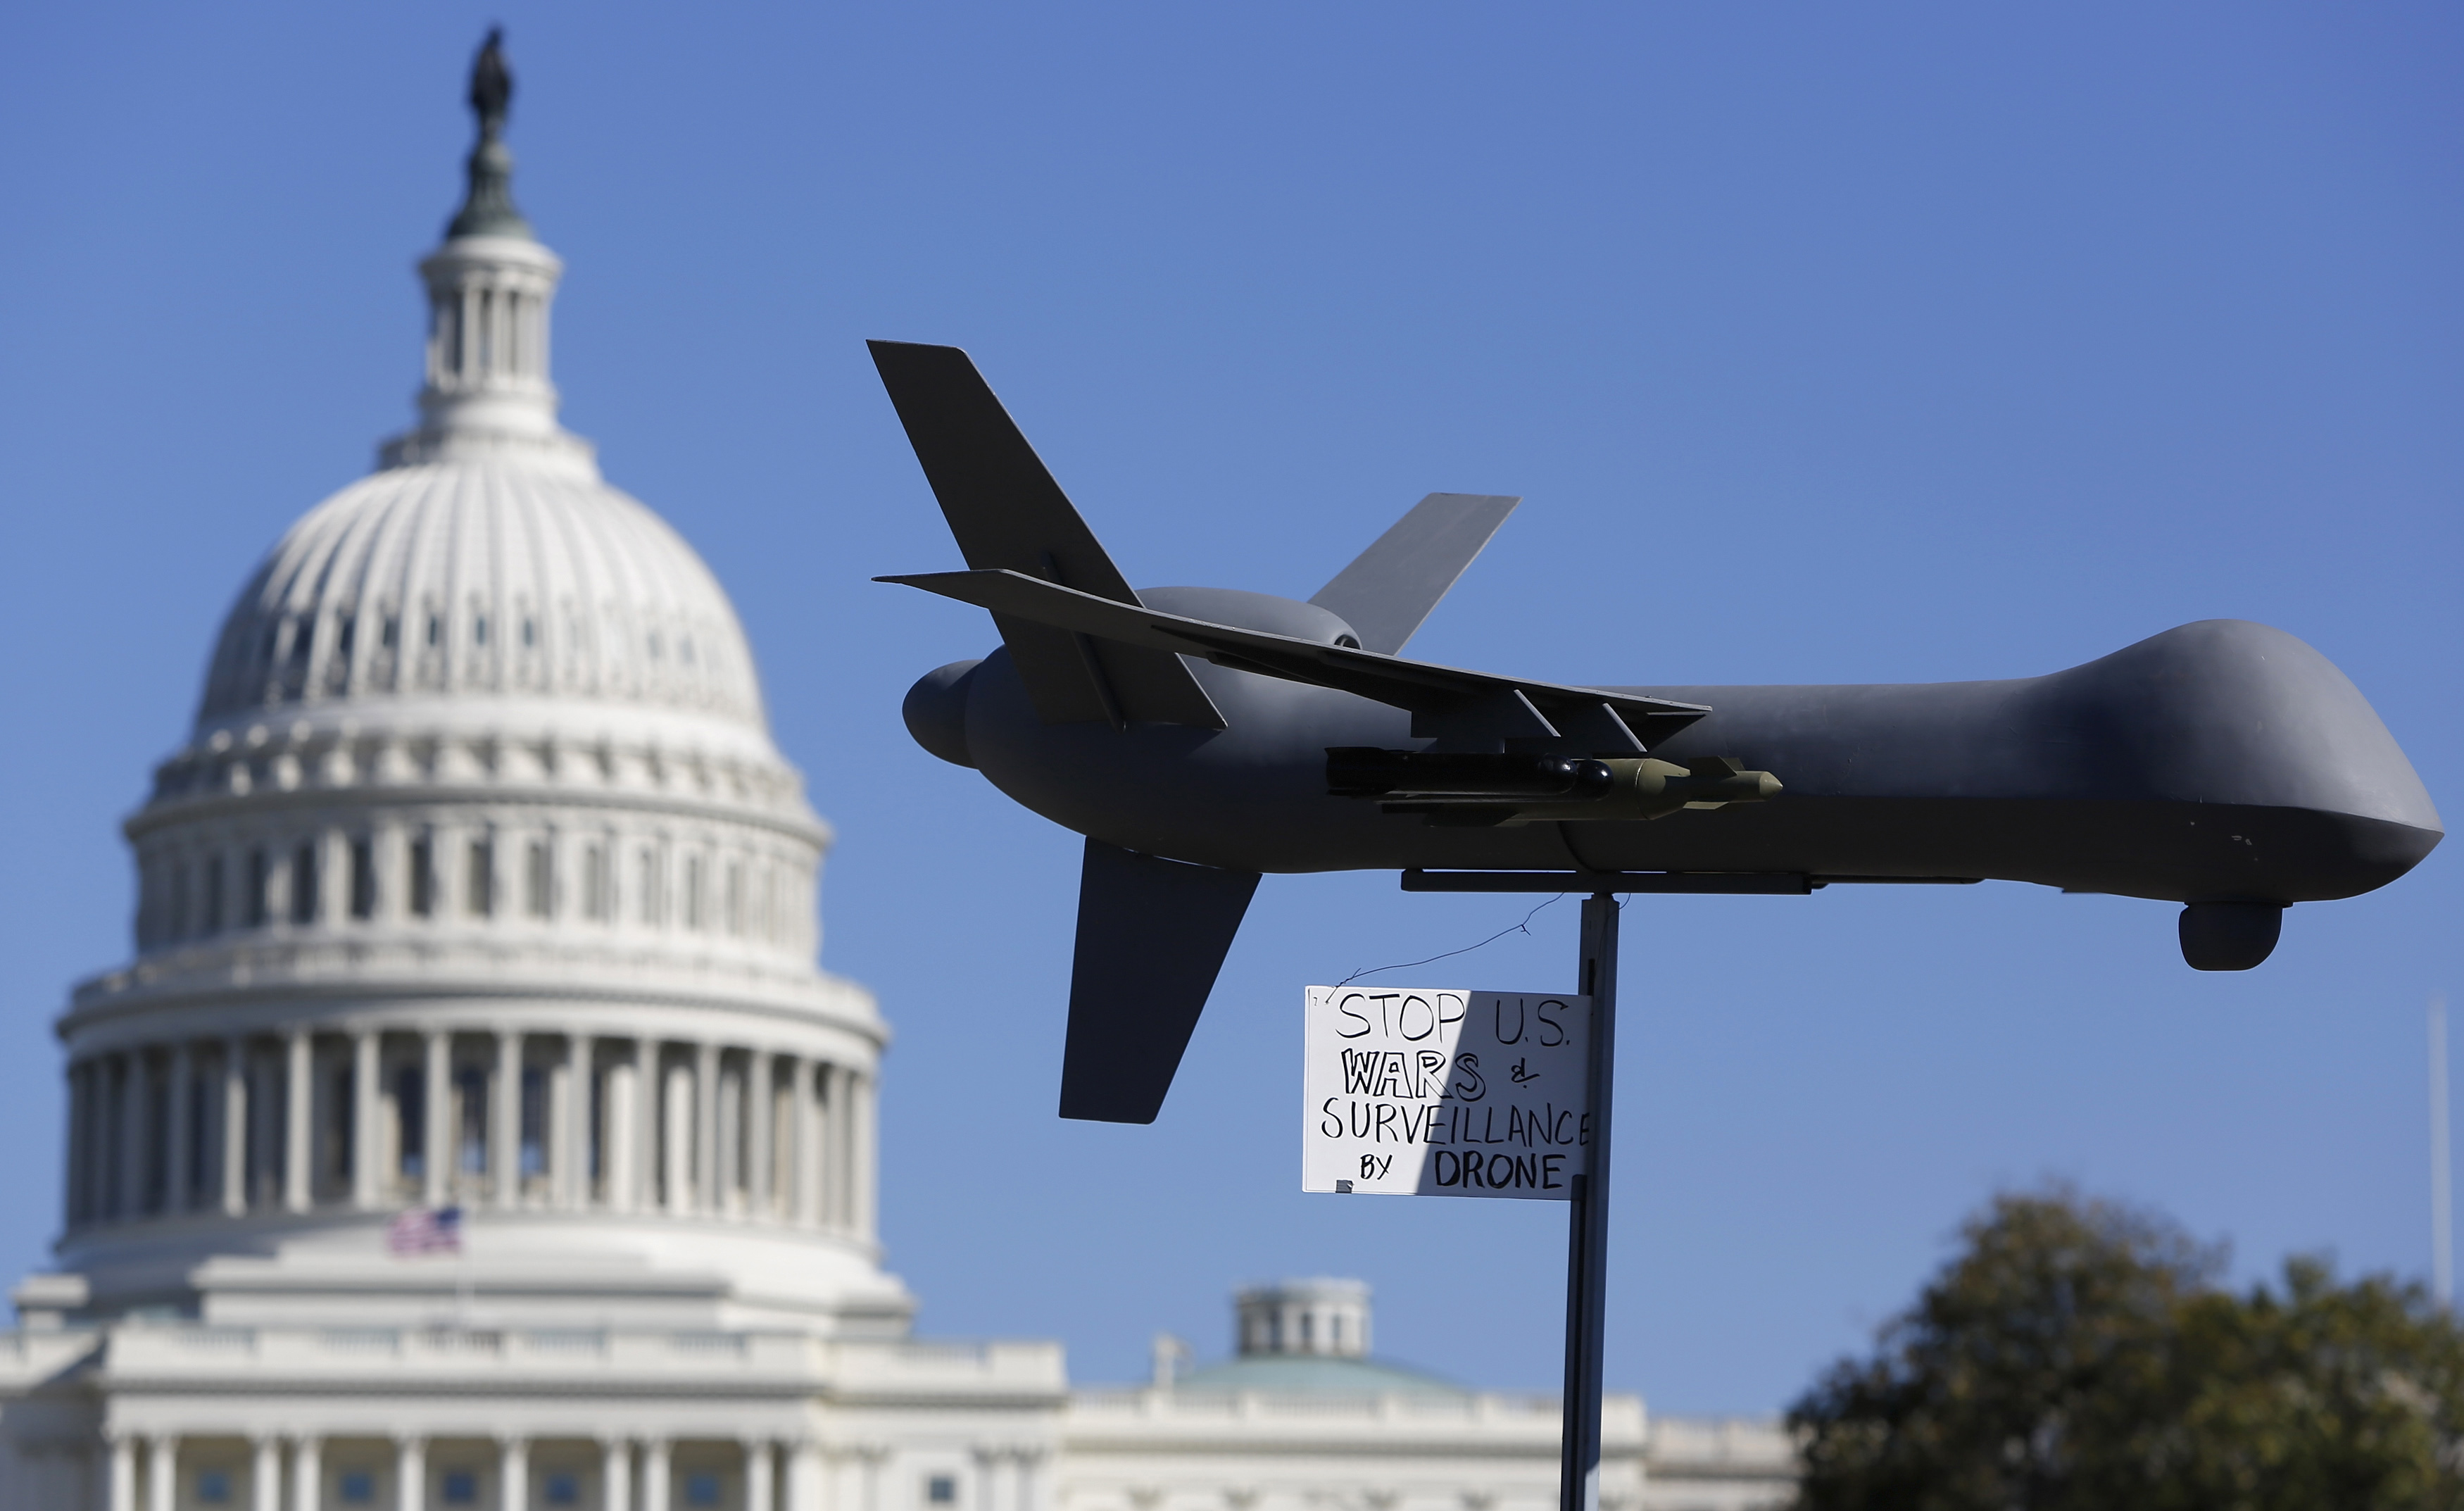 Demonstrators deploy model of U.S. drone aircraft at "Stop Watching Us: A Rally Against Mass Surveillance" near U.S. Capitol in Washington